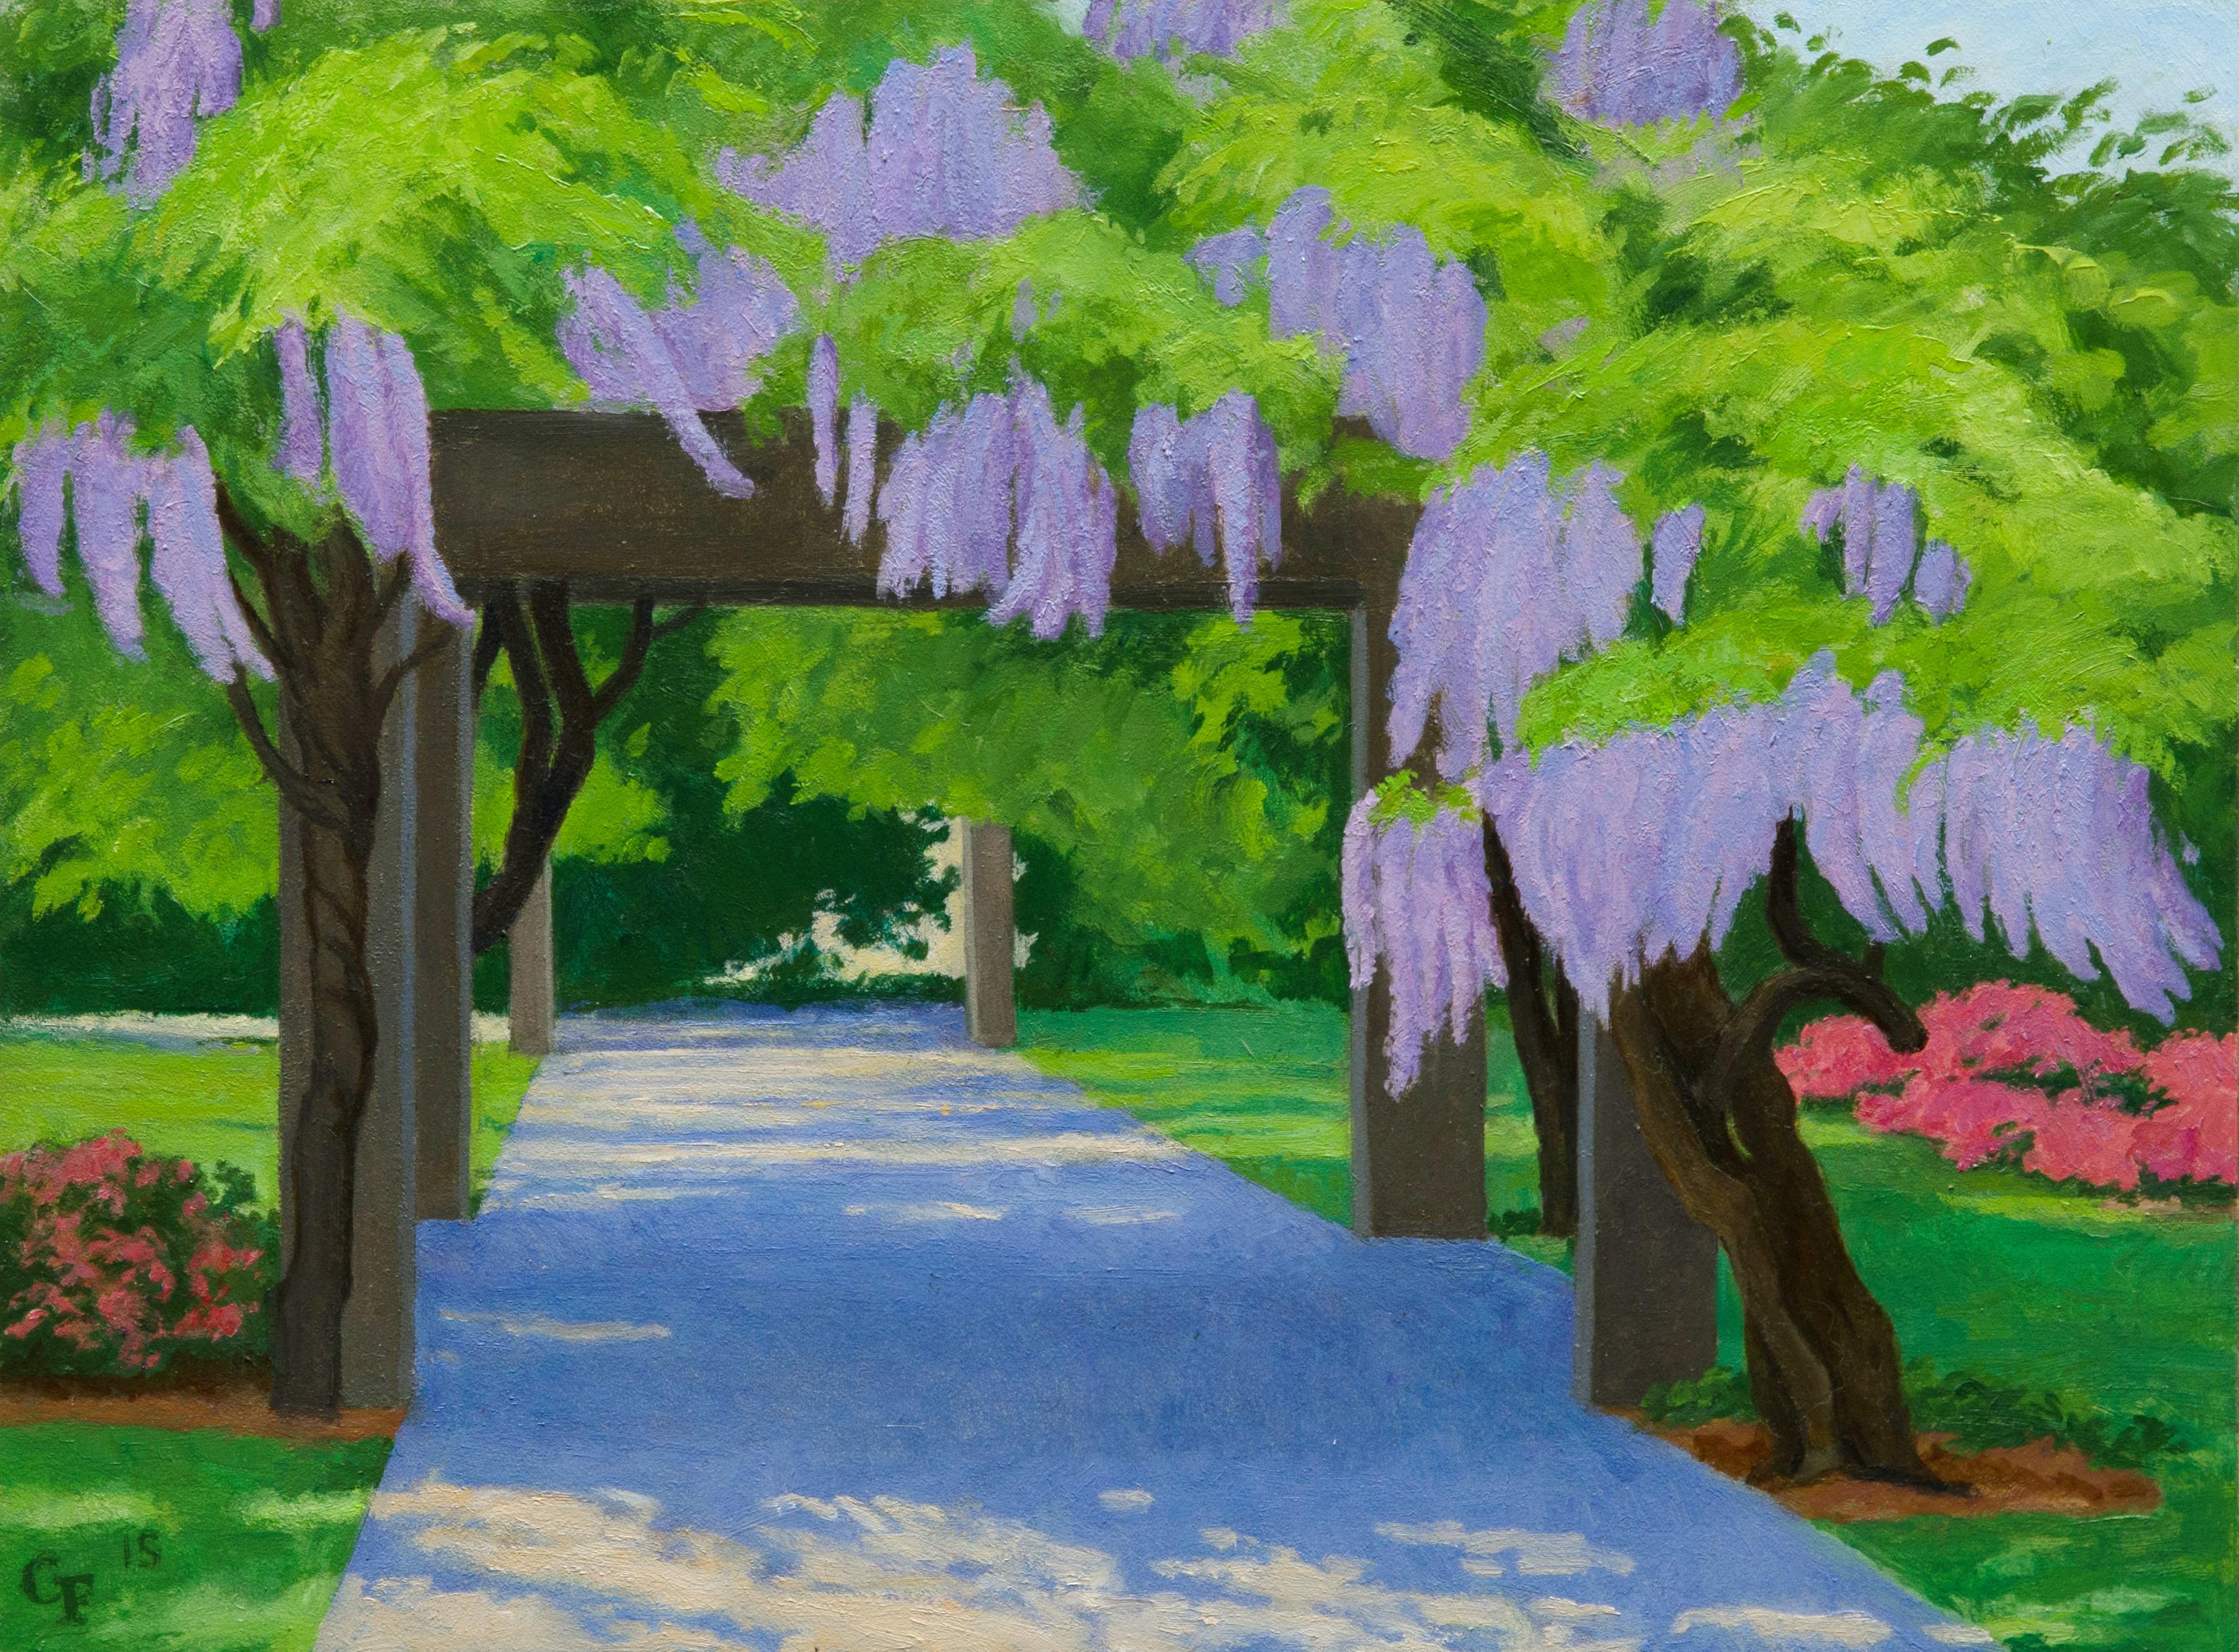 Gregory Frux Landscape Painting - "Wisteria I" colorful garden path view, greens, sunlight, flowers